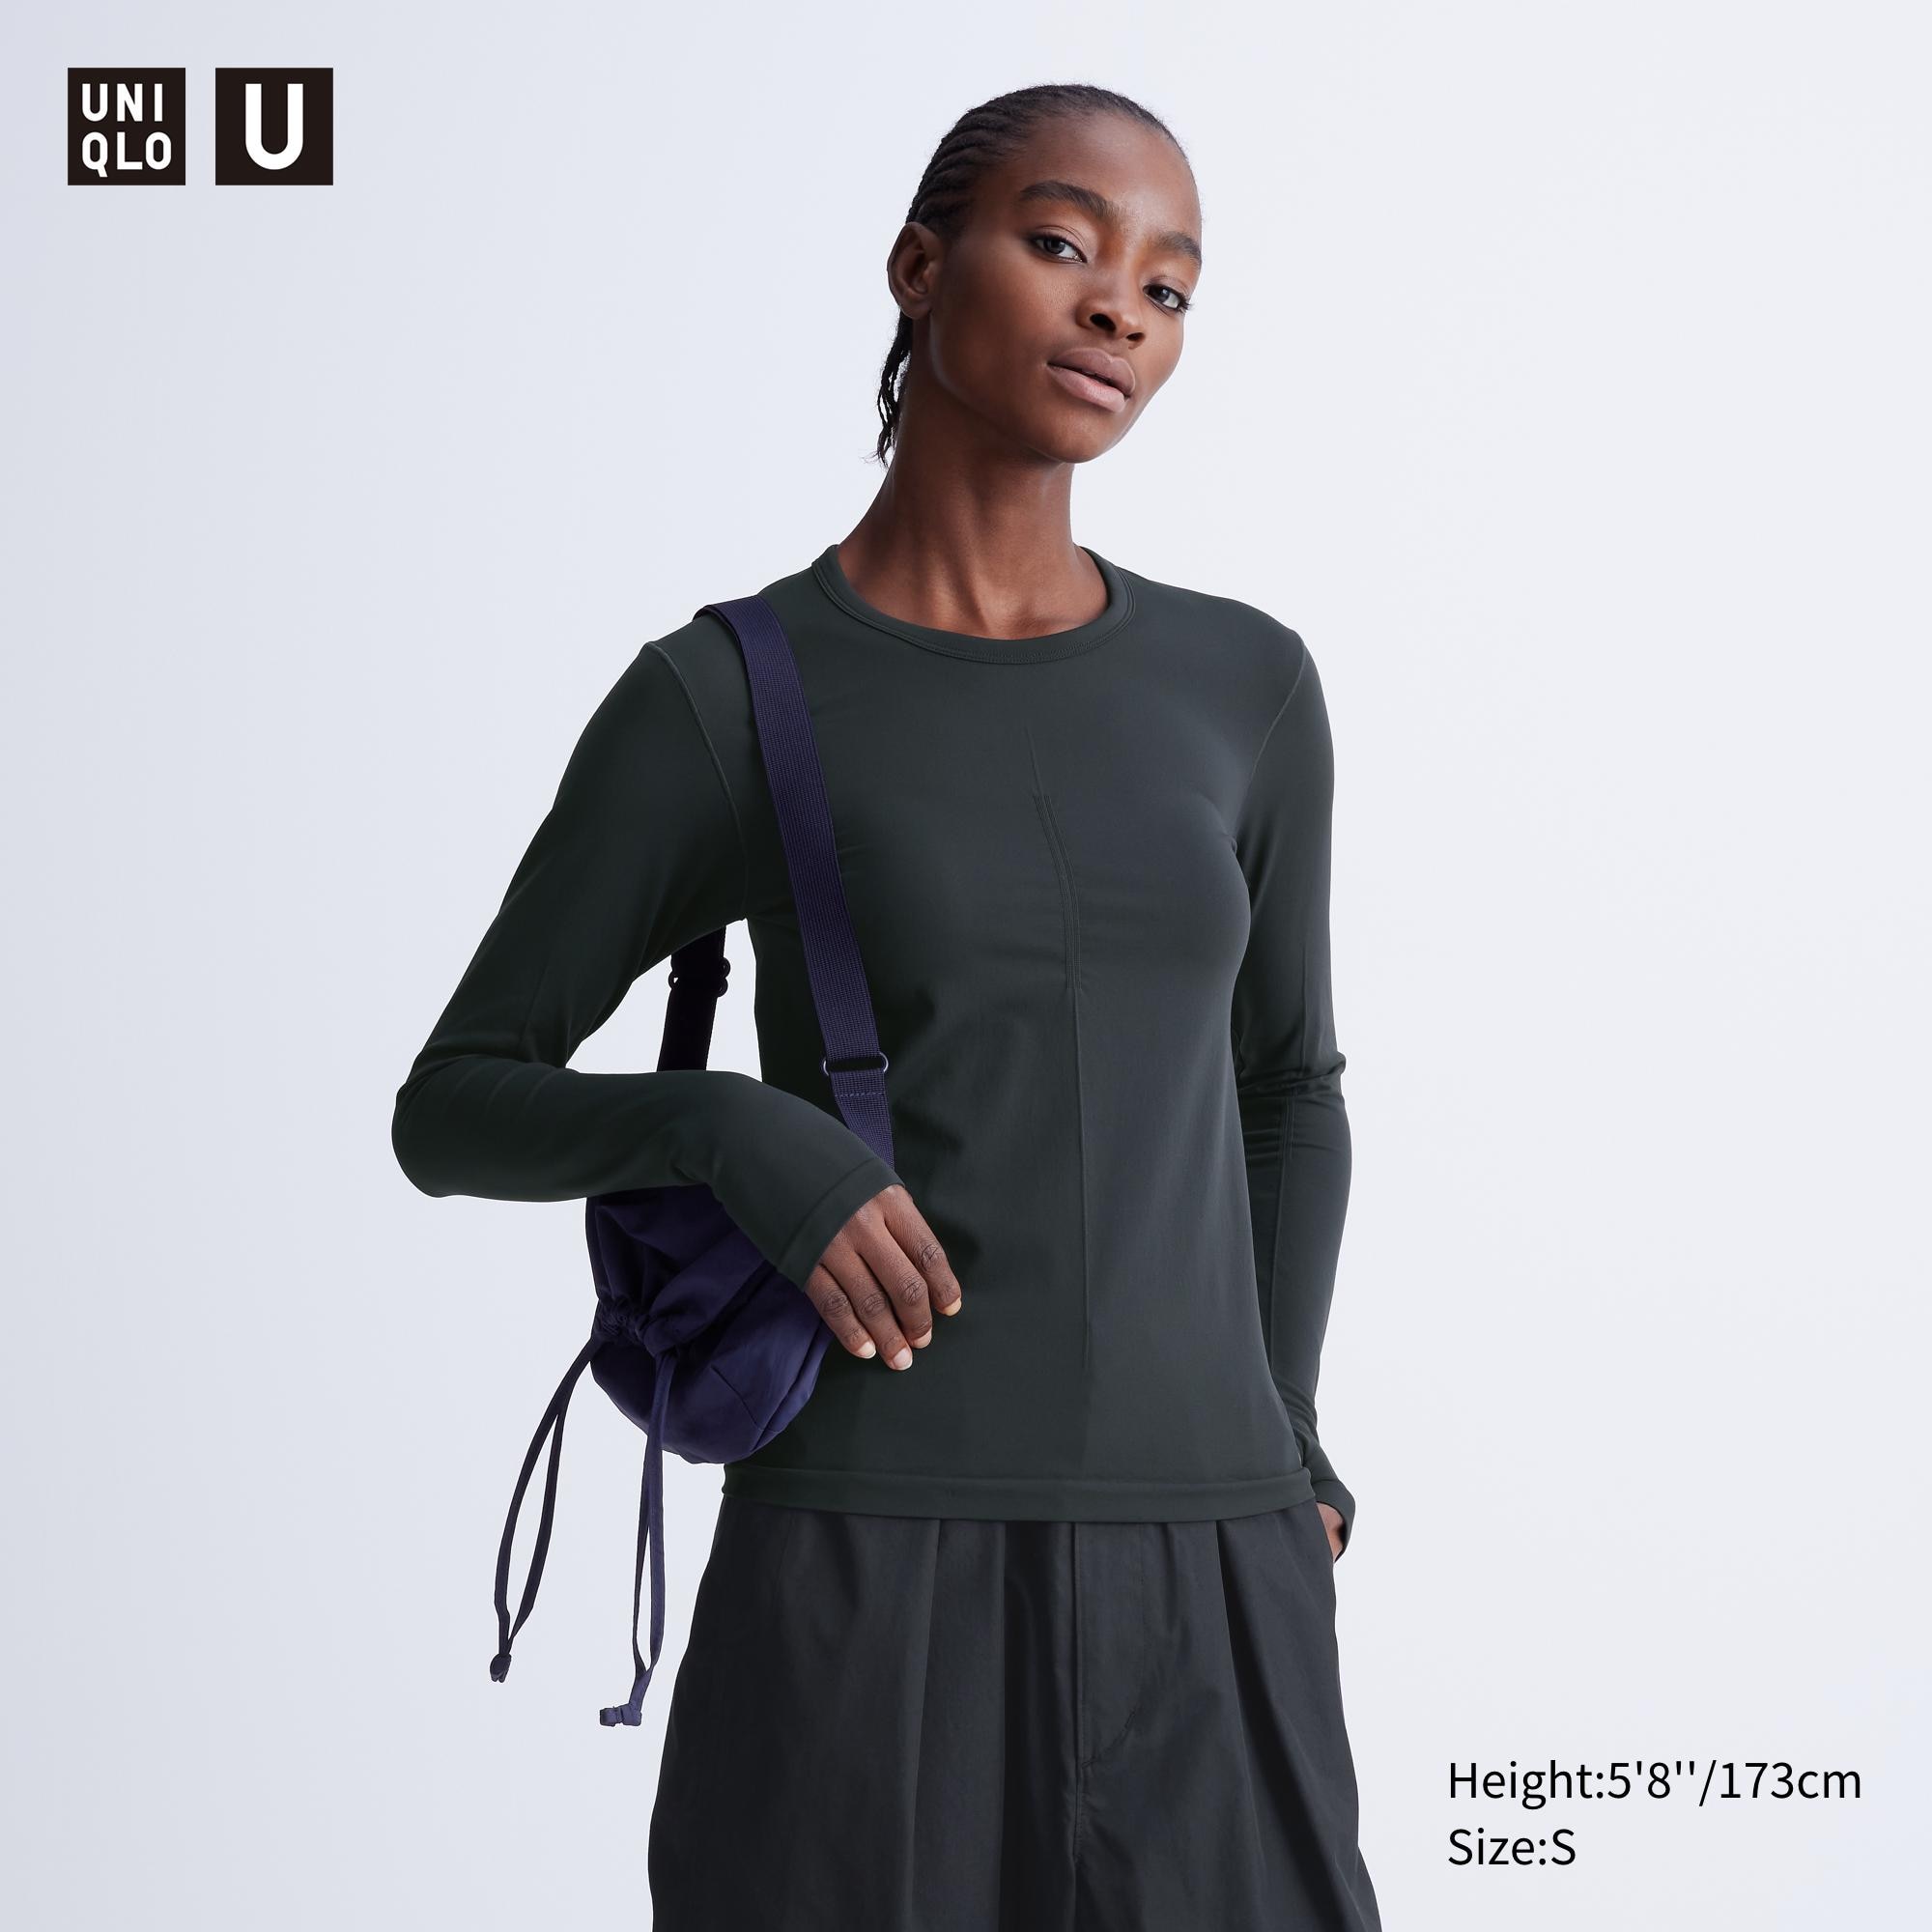 With AIRism and UV Protection wear from UNIQLO, bask in the joy of